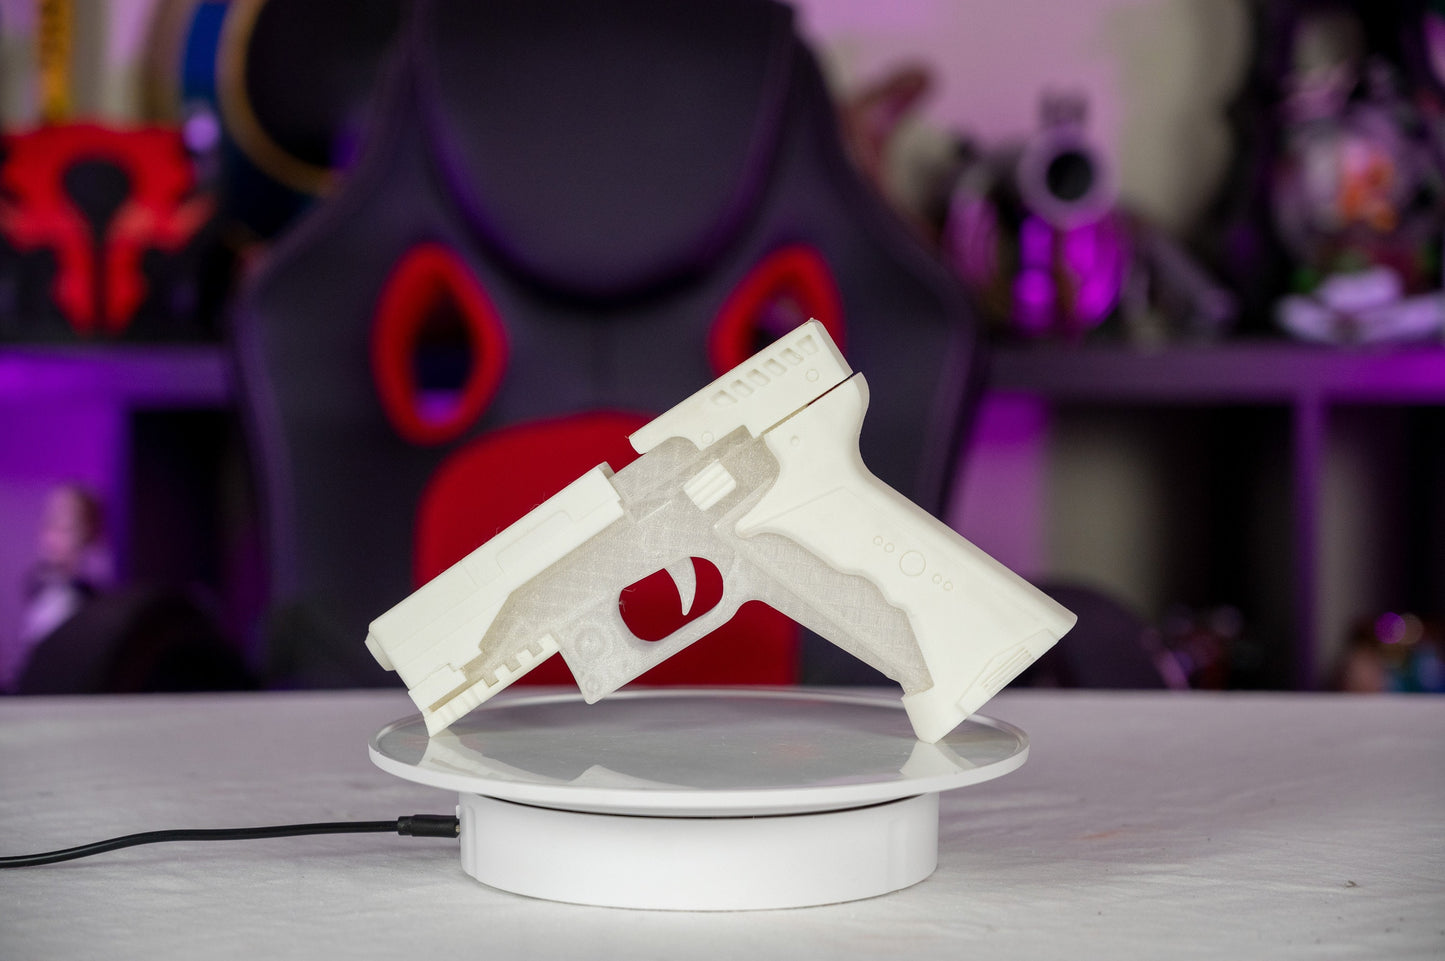 3D Printed Major's Thermoptic Prop Ghost In The Shell